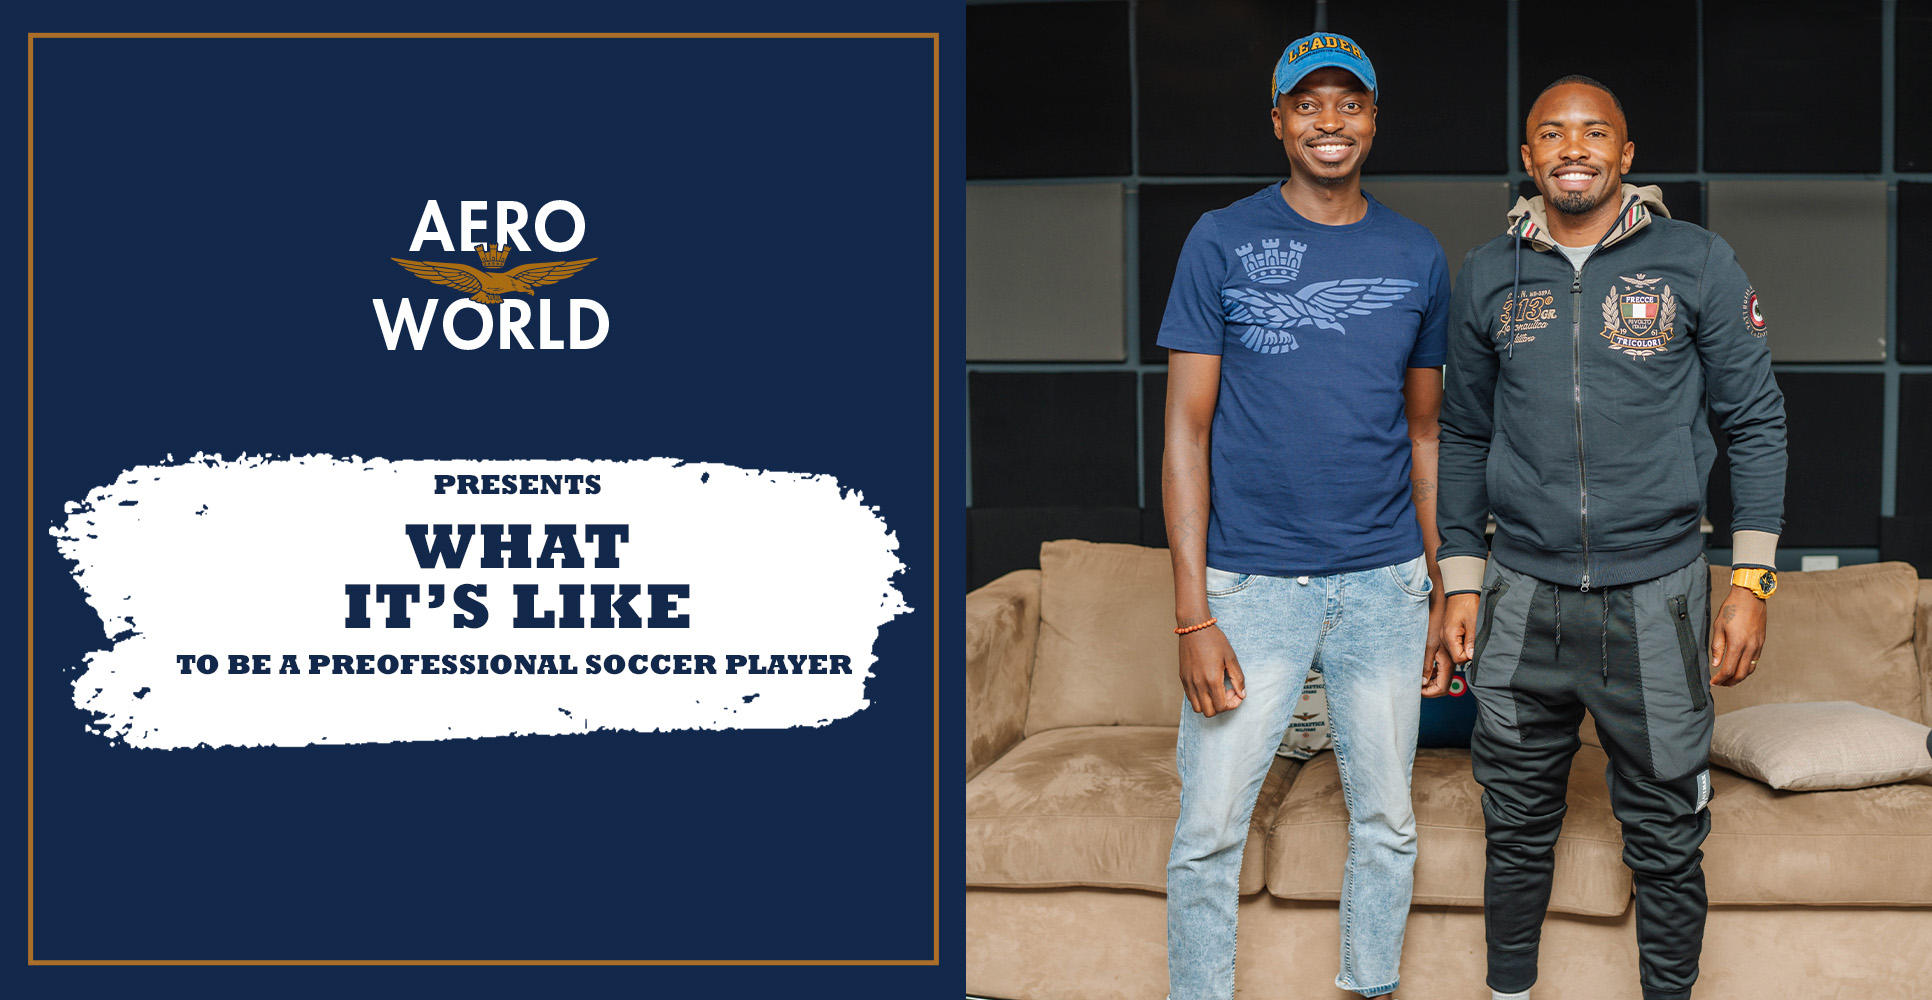 Aero World Presents - What It's Like To Be A Soccer Player